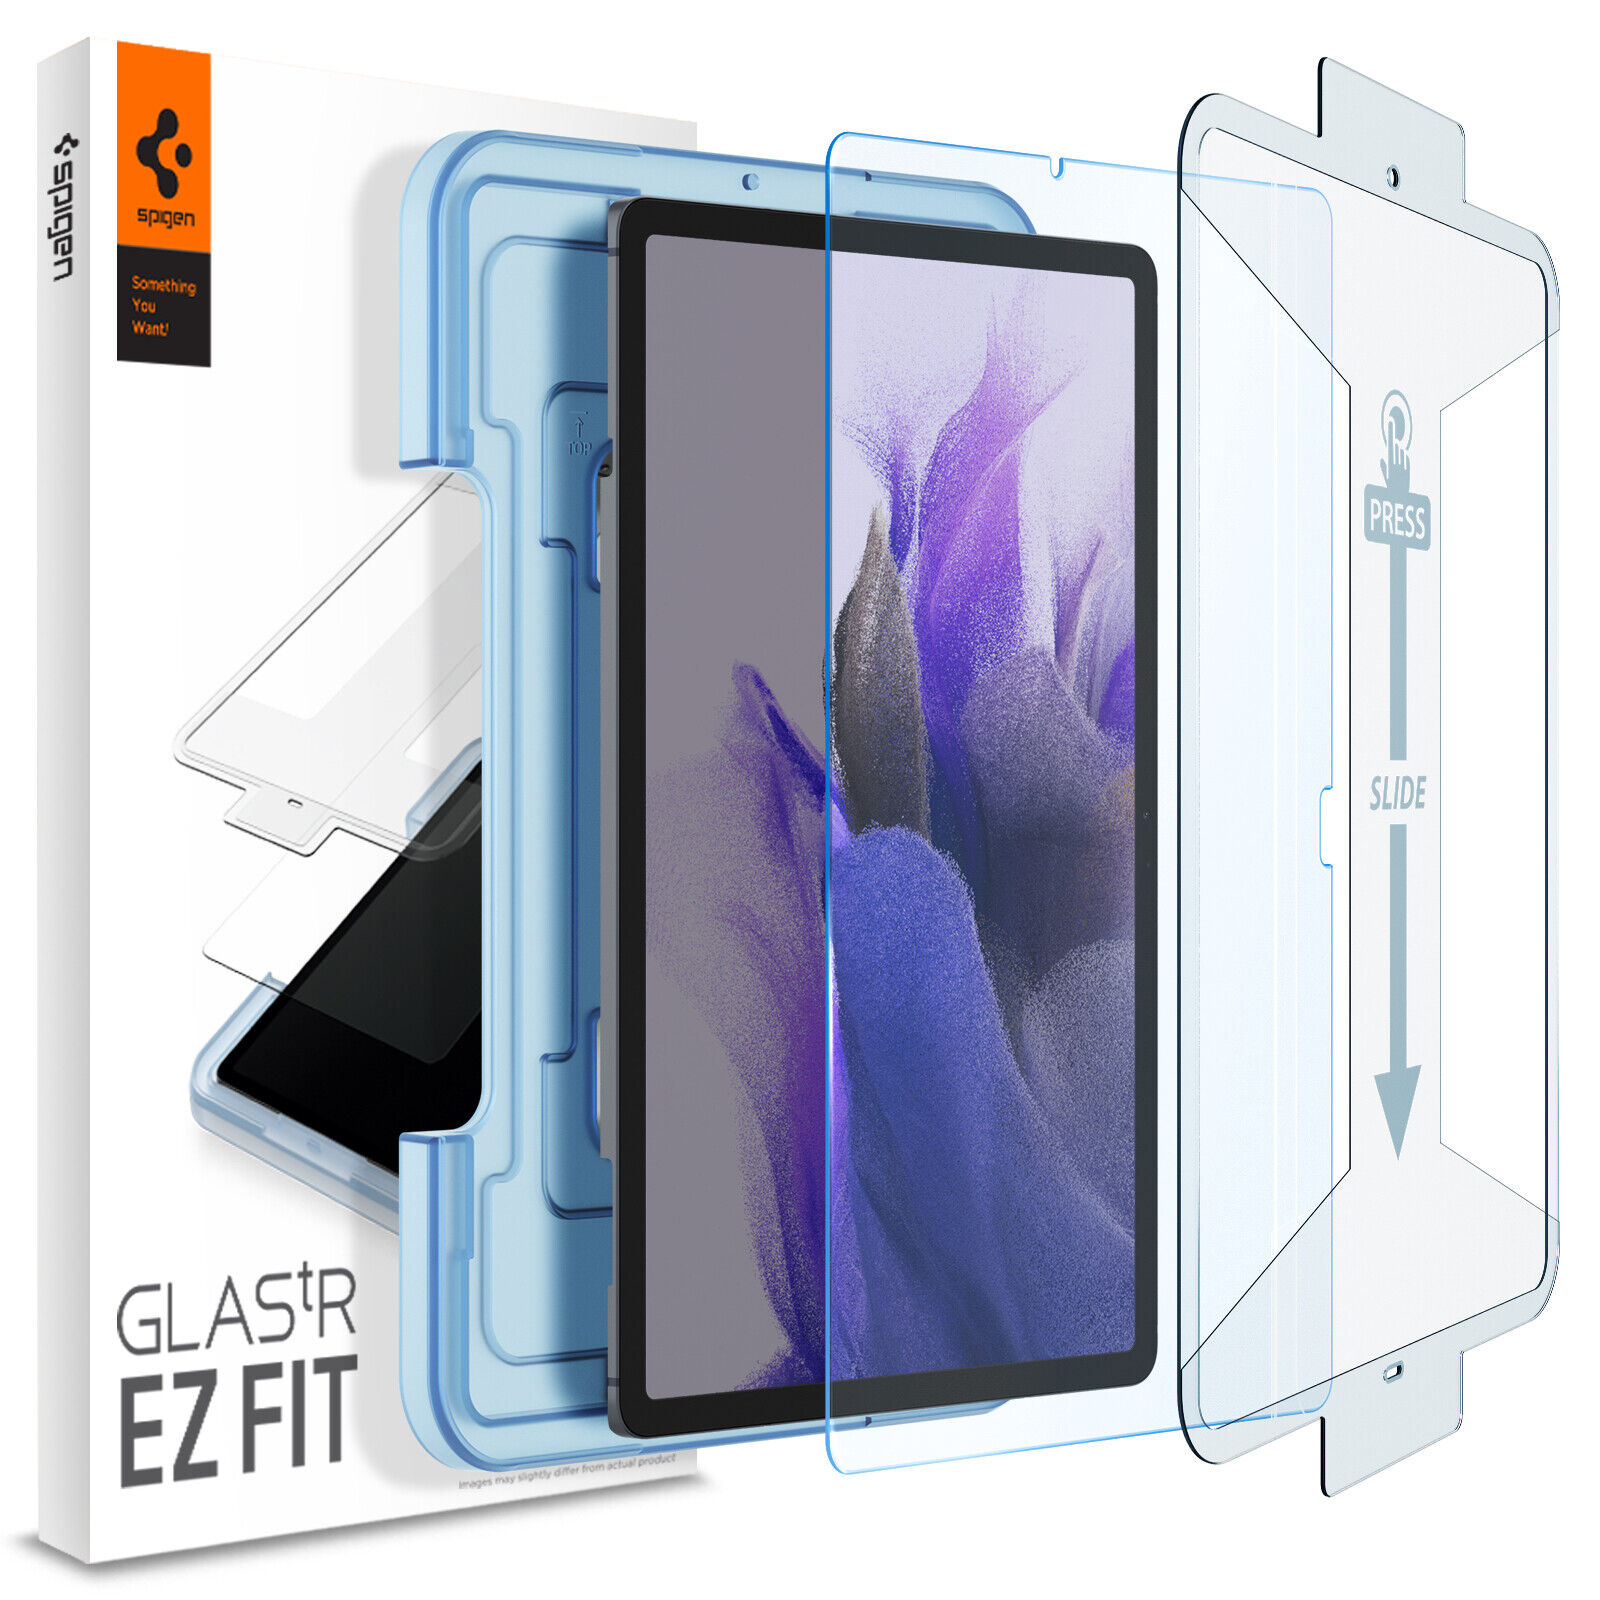 Galaxy Tab S7 FE 5G Spigen Scr OFFicial mail order Glass Fit Glas.tR Inexpensive Tempered EZ